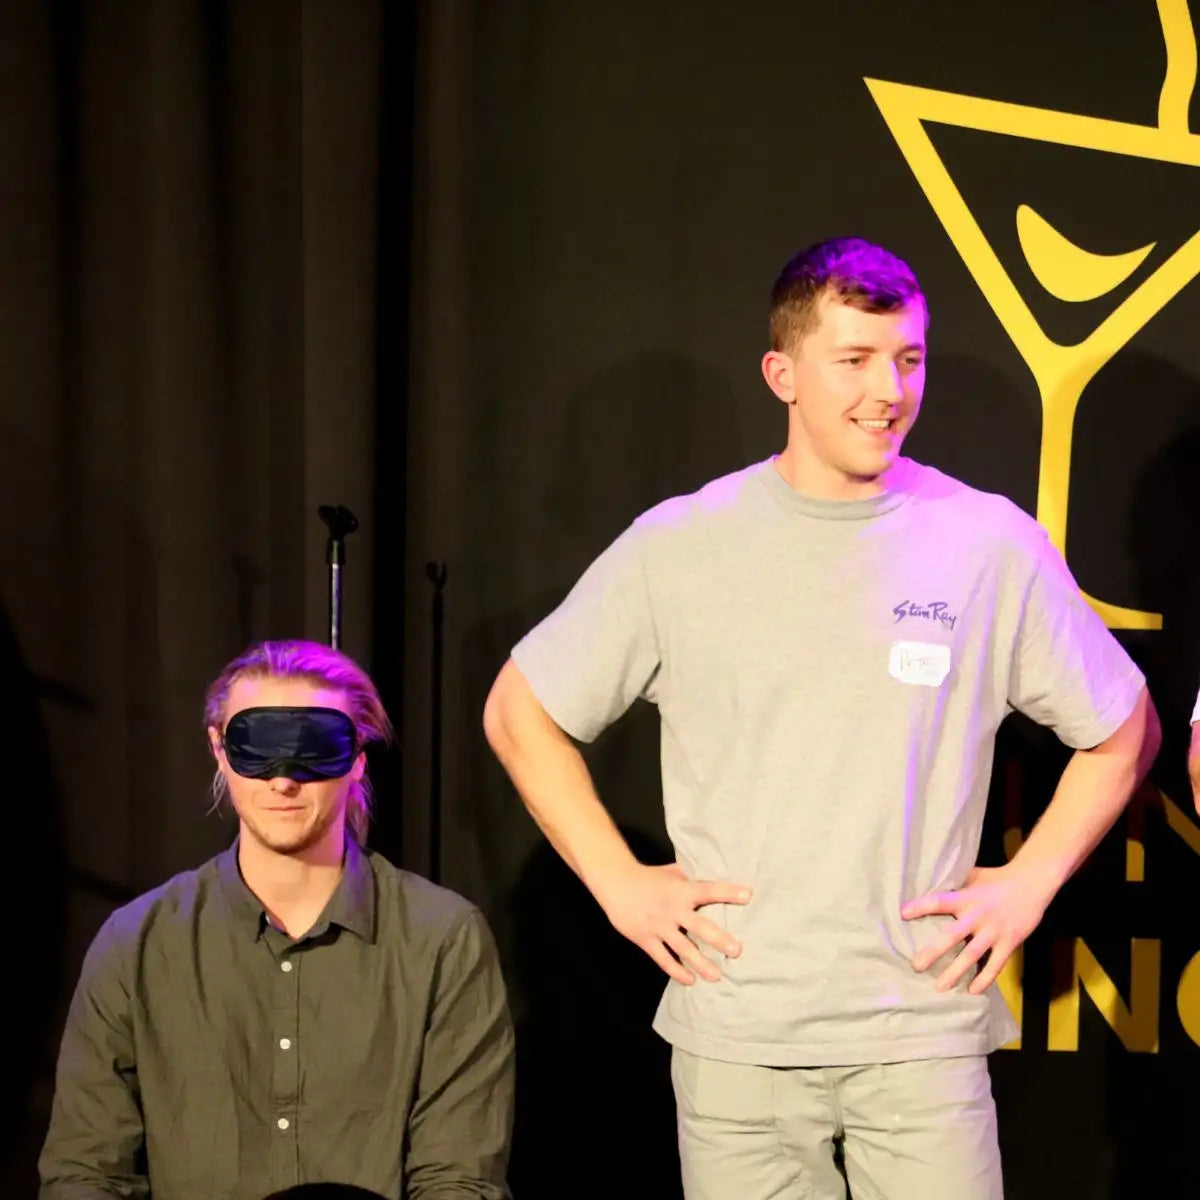 guys having a laugh at a singles event. Blind date game show for singles.